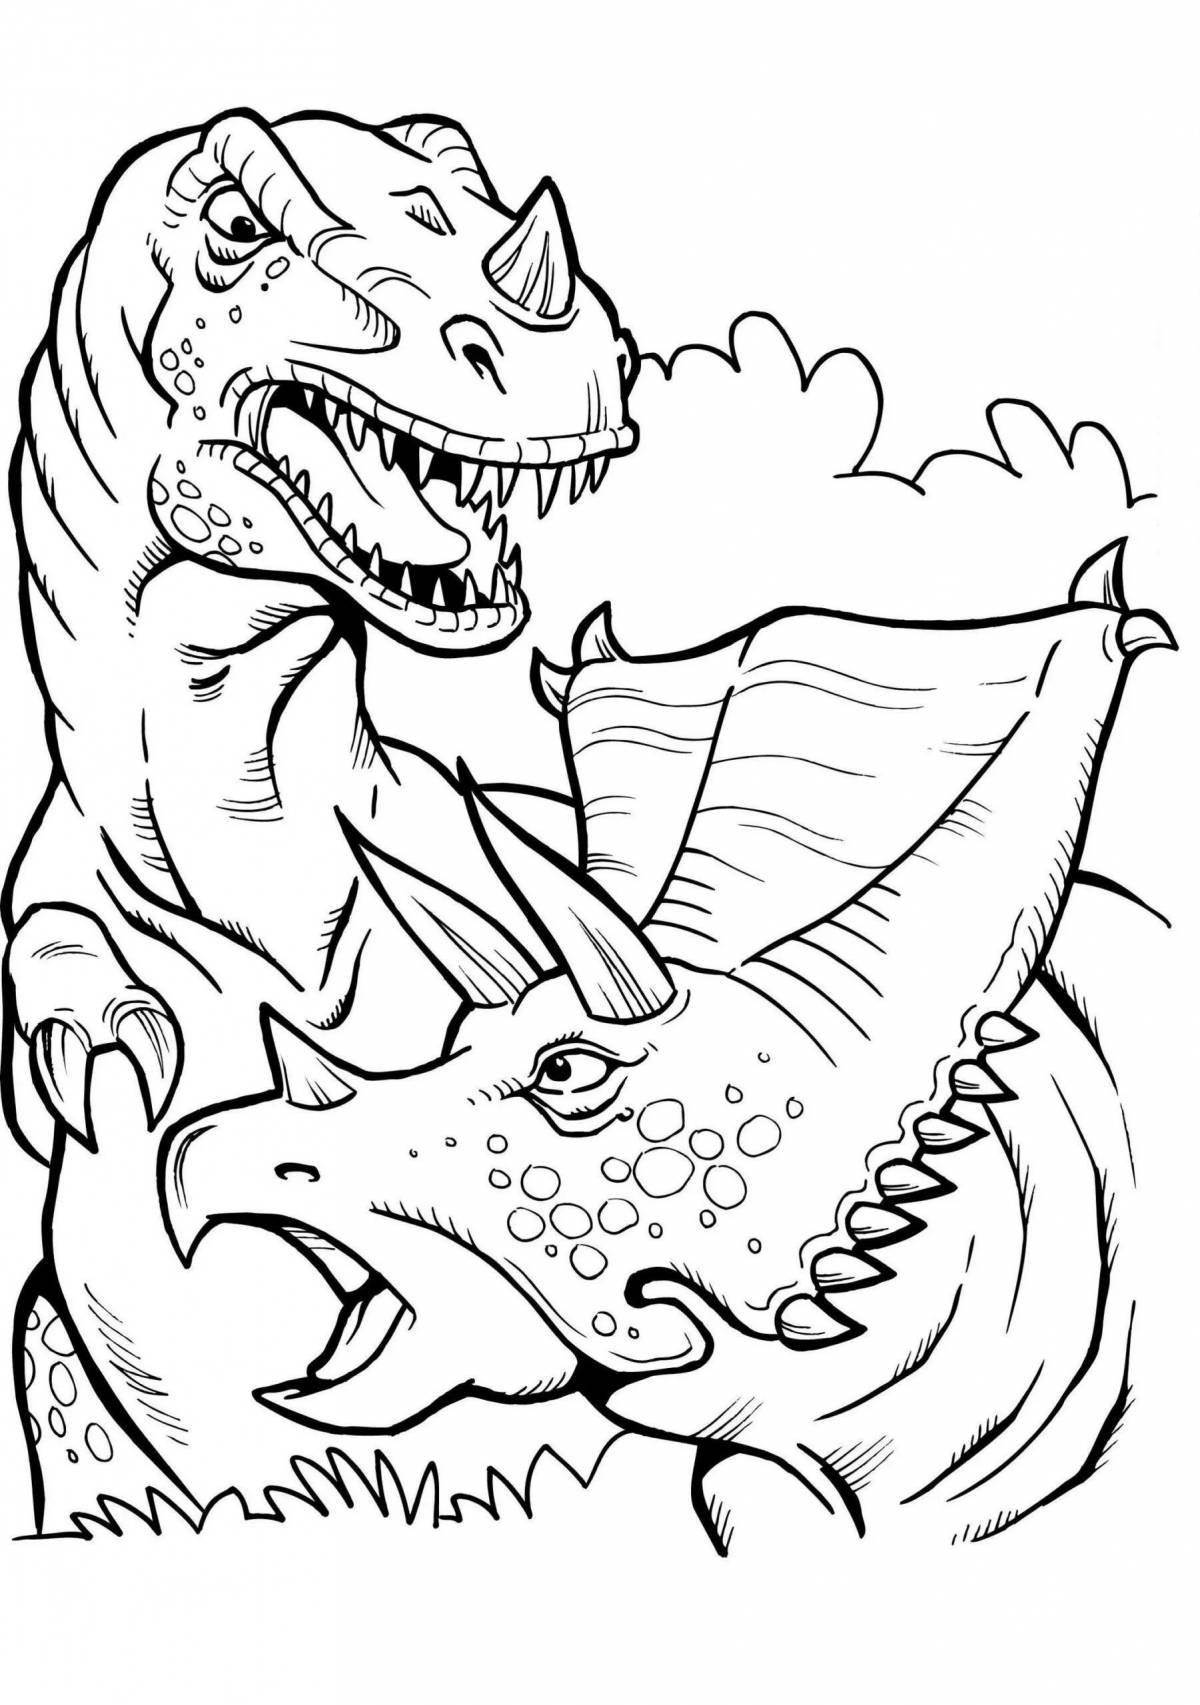 Sweet dino coloring page